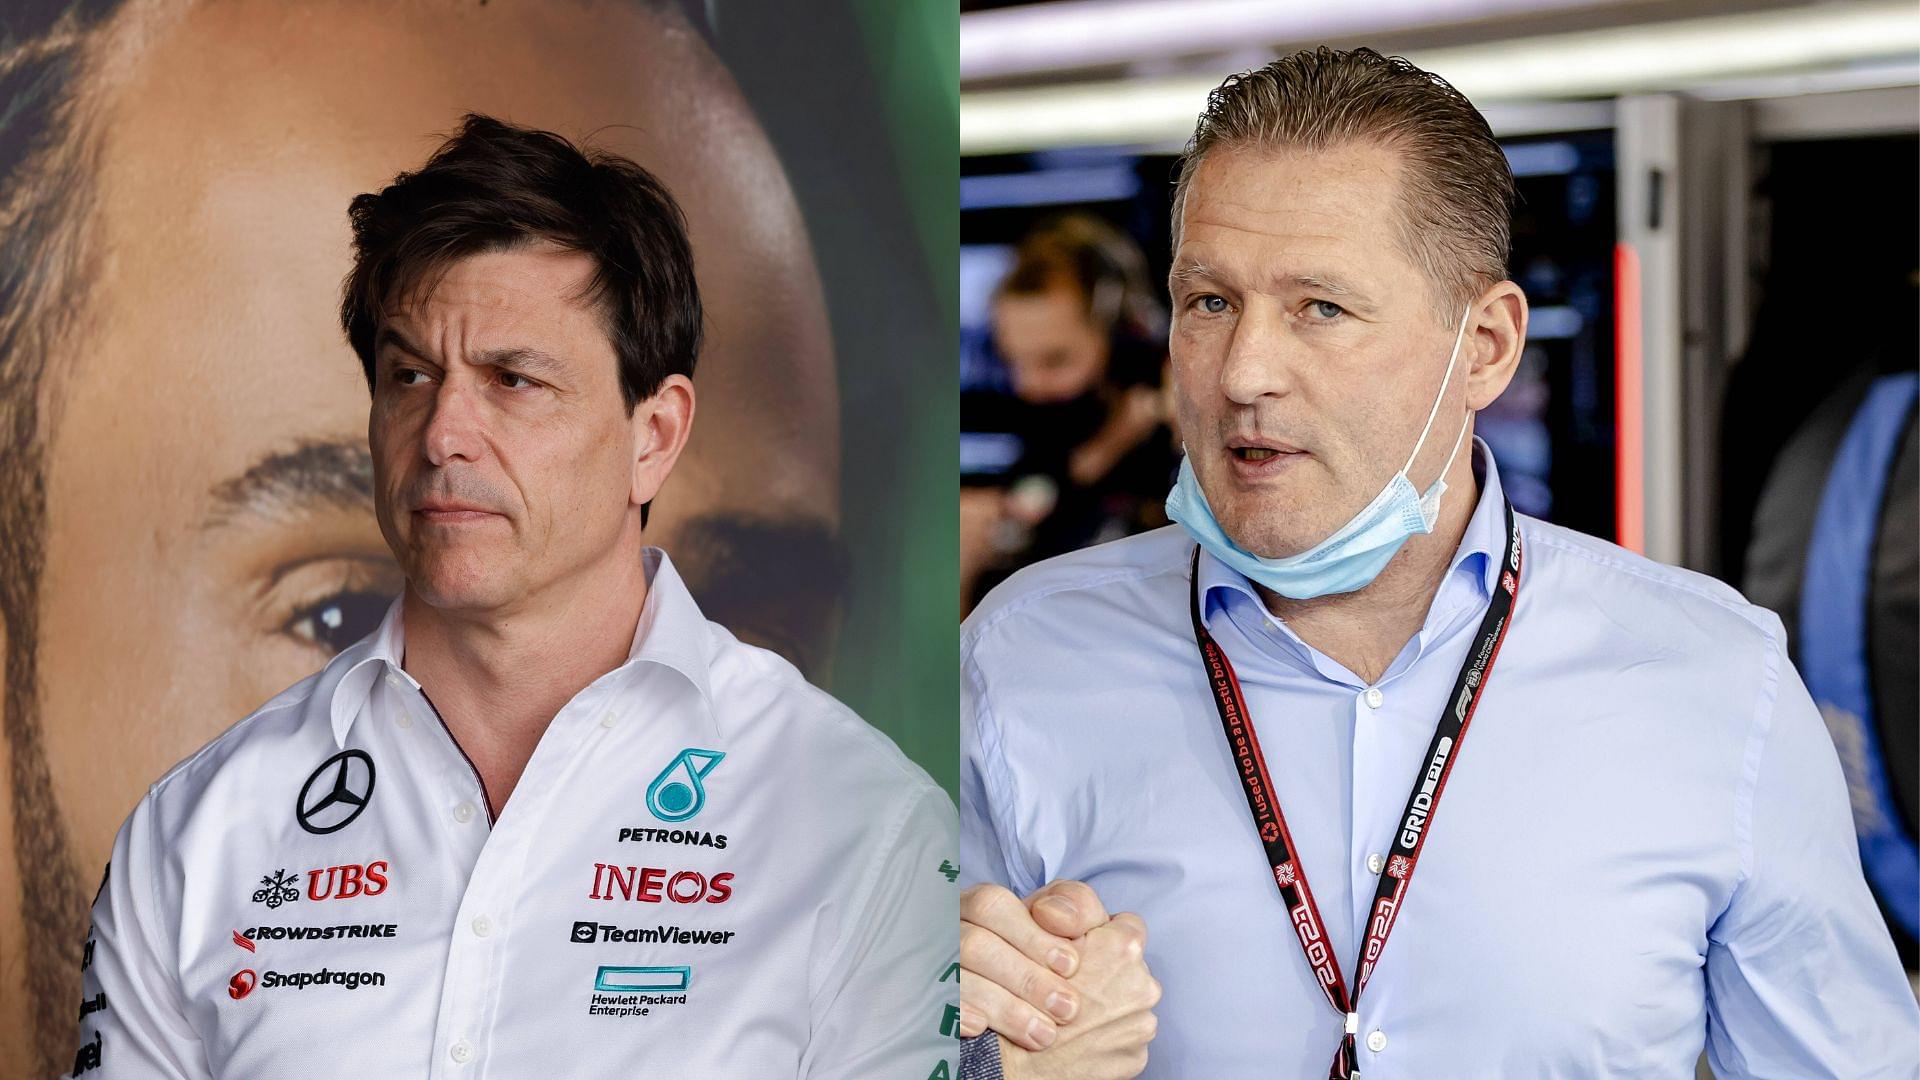 "Optimistic" Toto Wolff Mends Relationship With Jos Verstappen Just to Woo Max